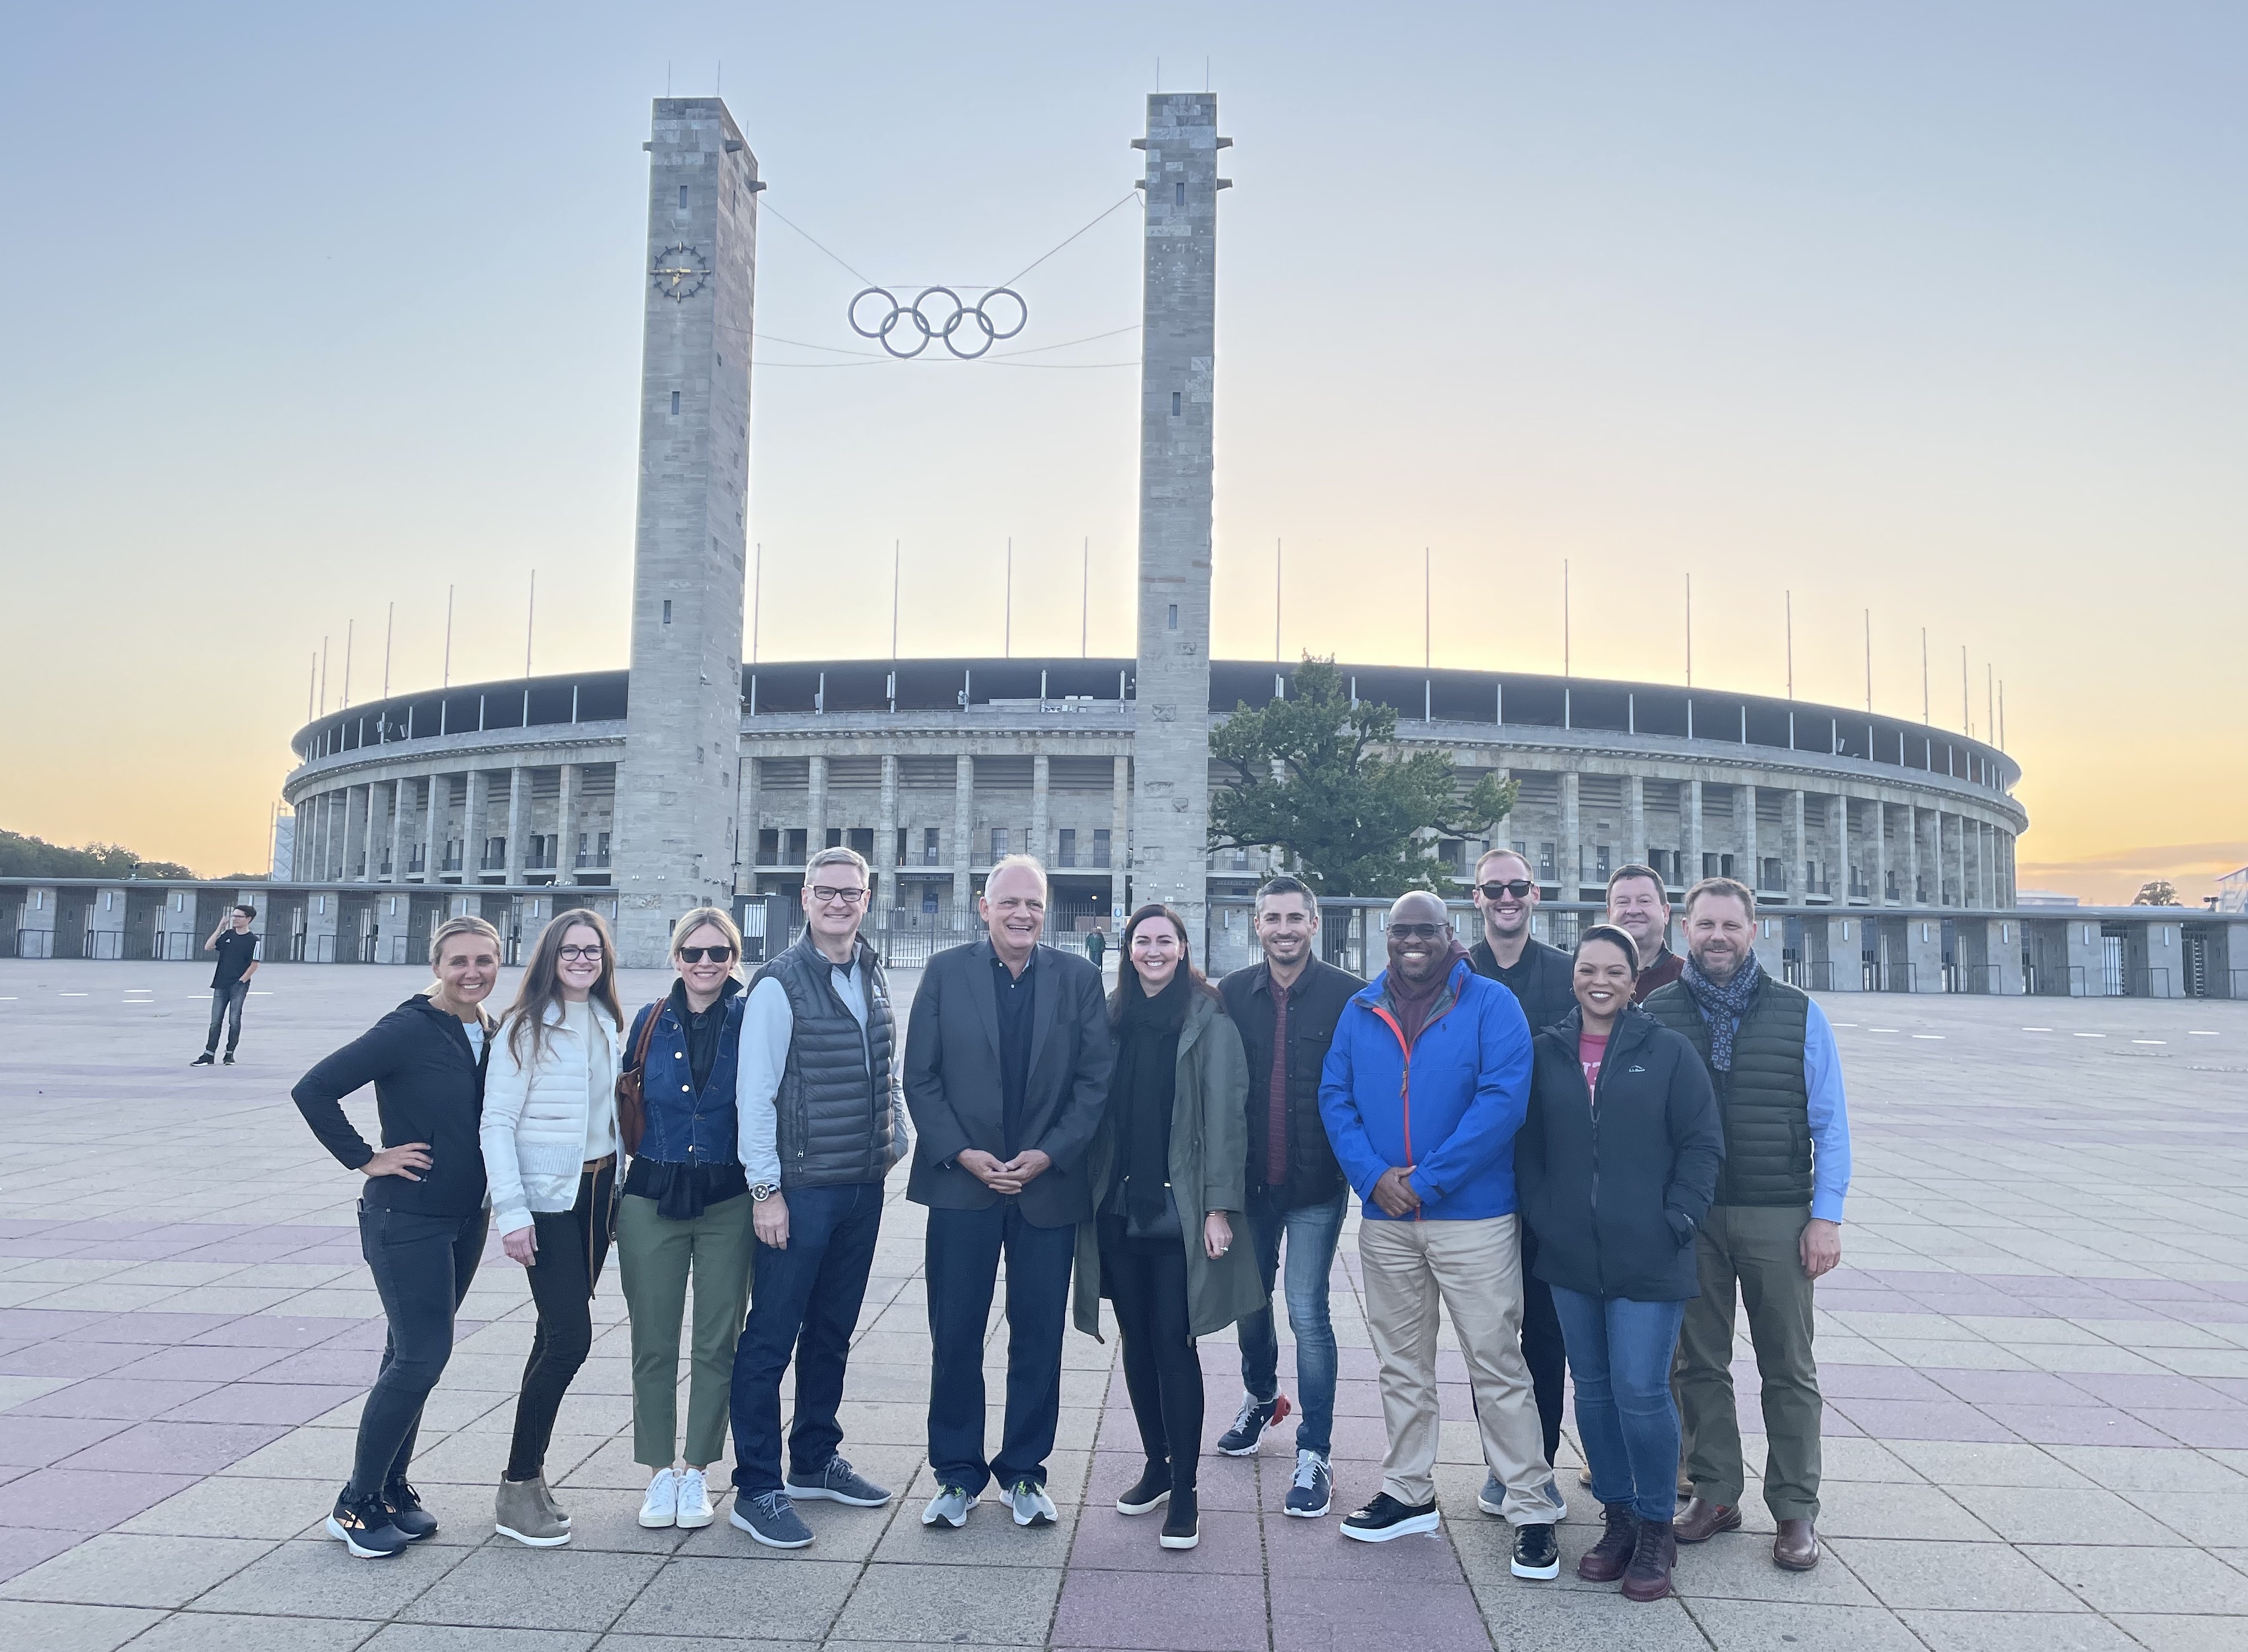 The group in front of the Olympic Stadium in Berlin